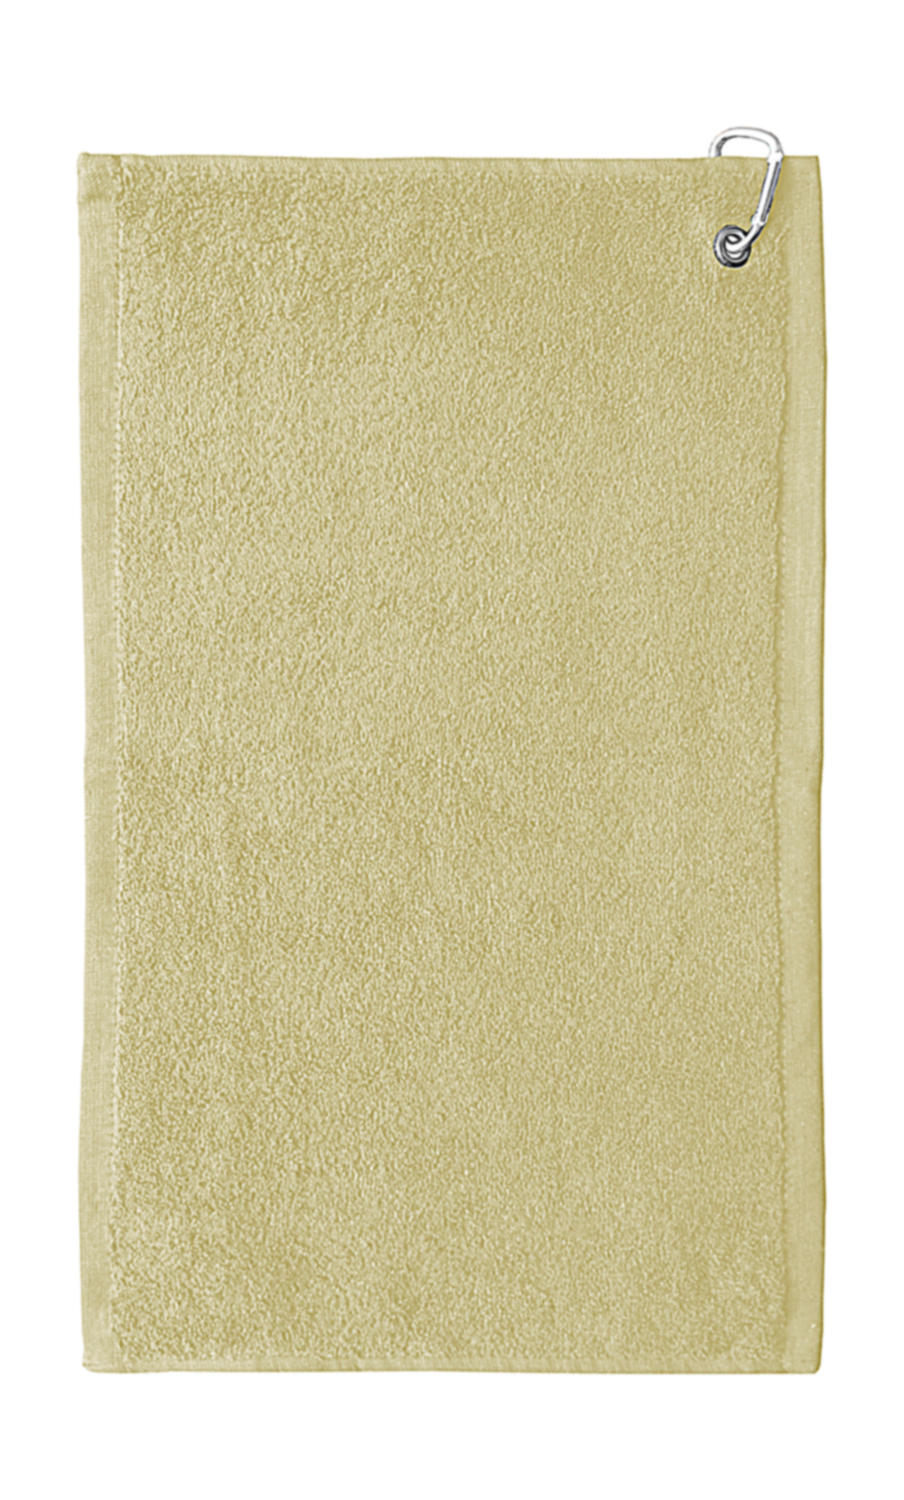  Thames Golf Towel 30x50 cm in Farbe Sand